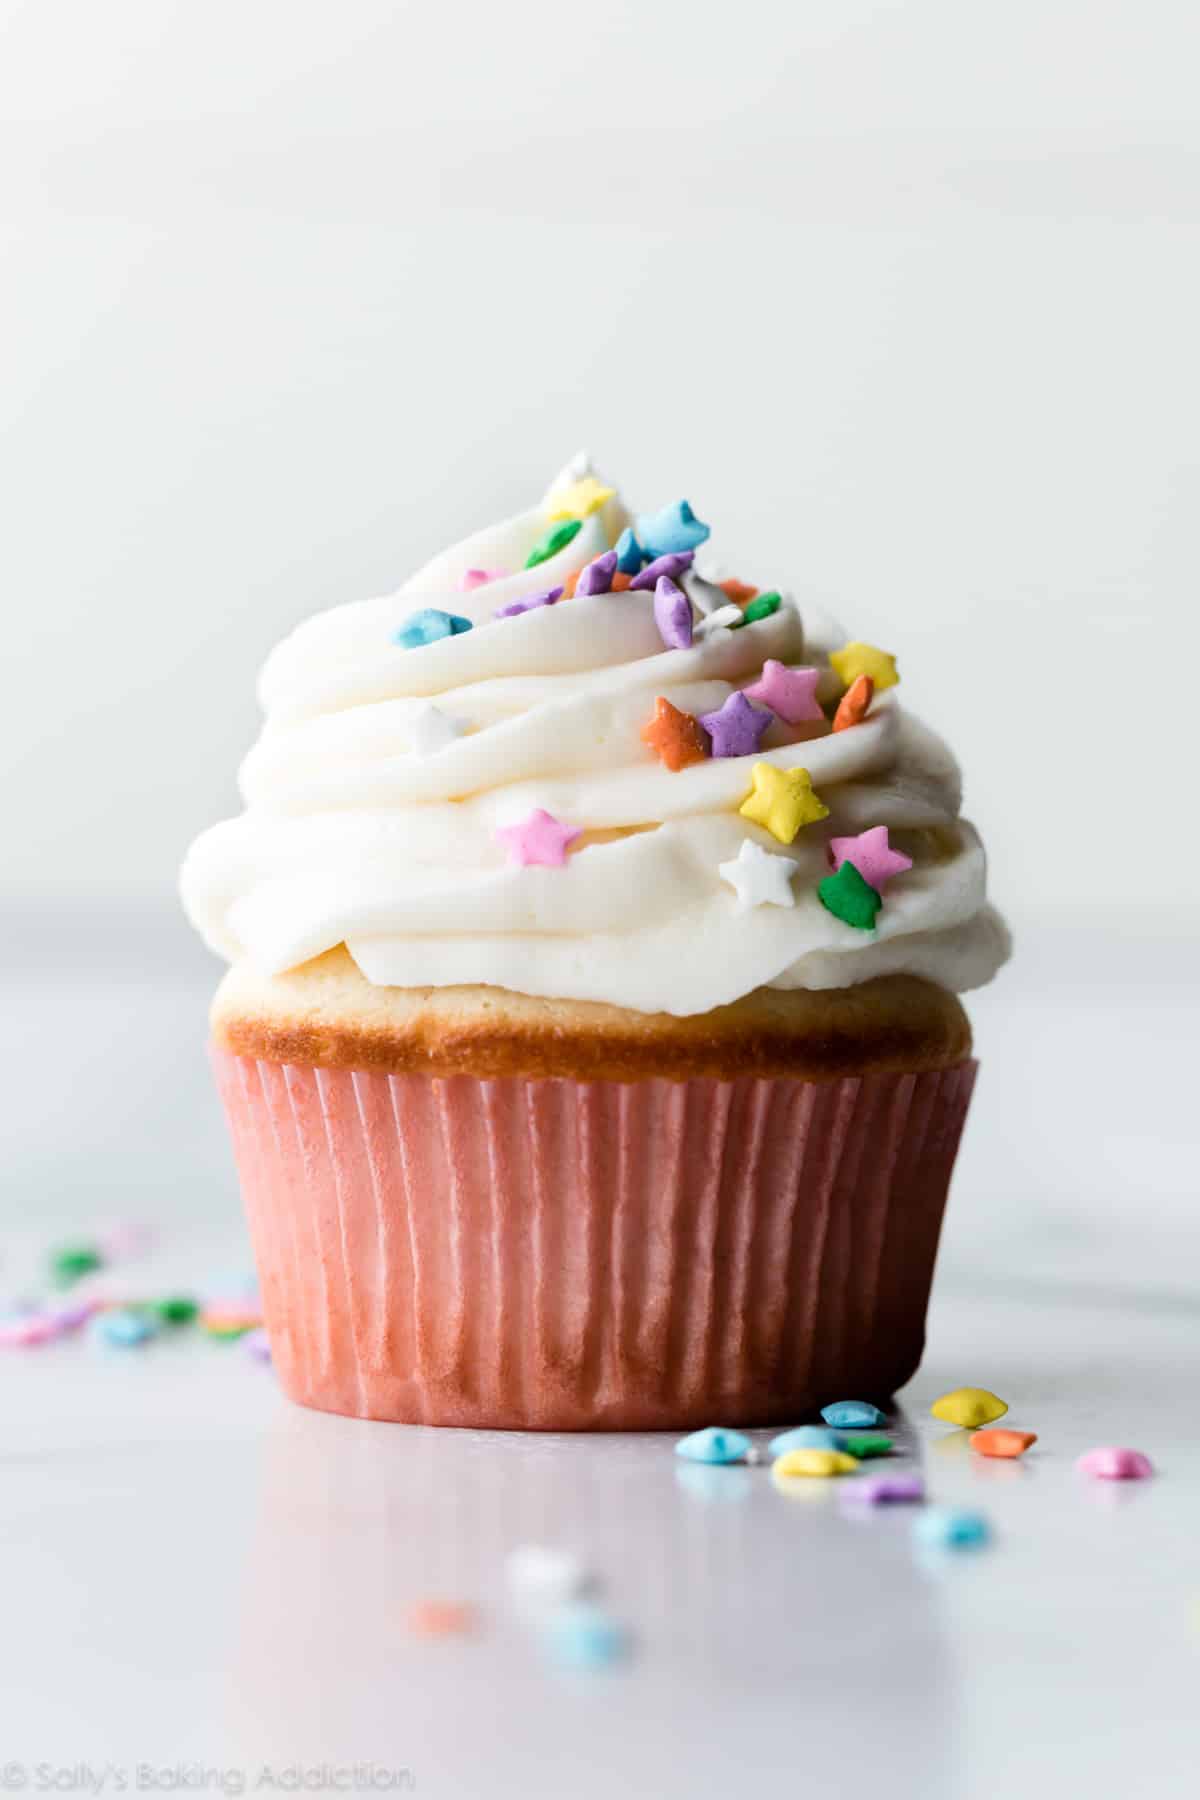 Vanilla cupcake with vanilla frosting and star sprinkles